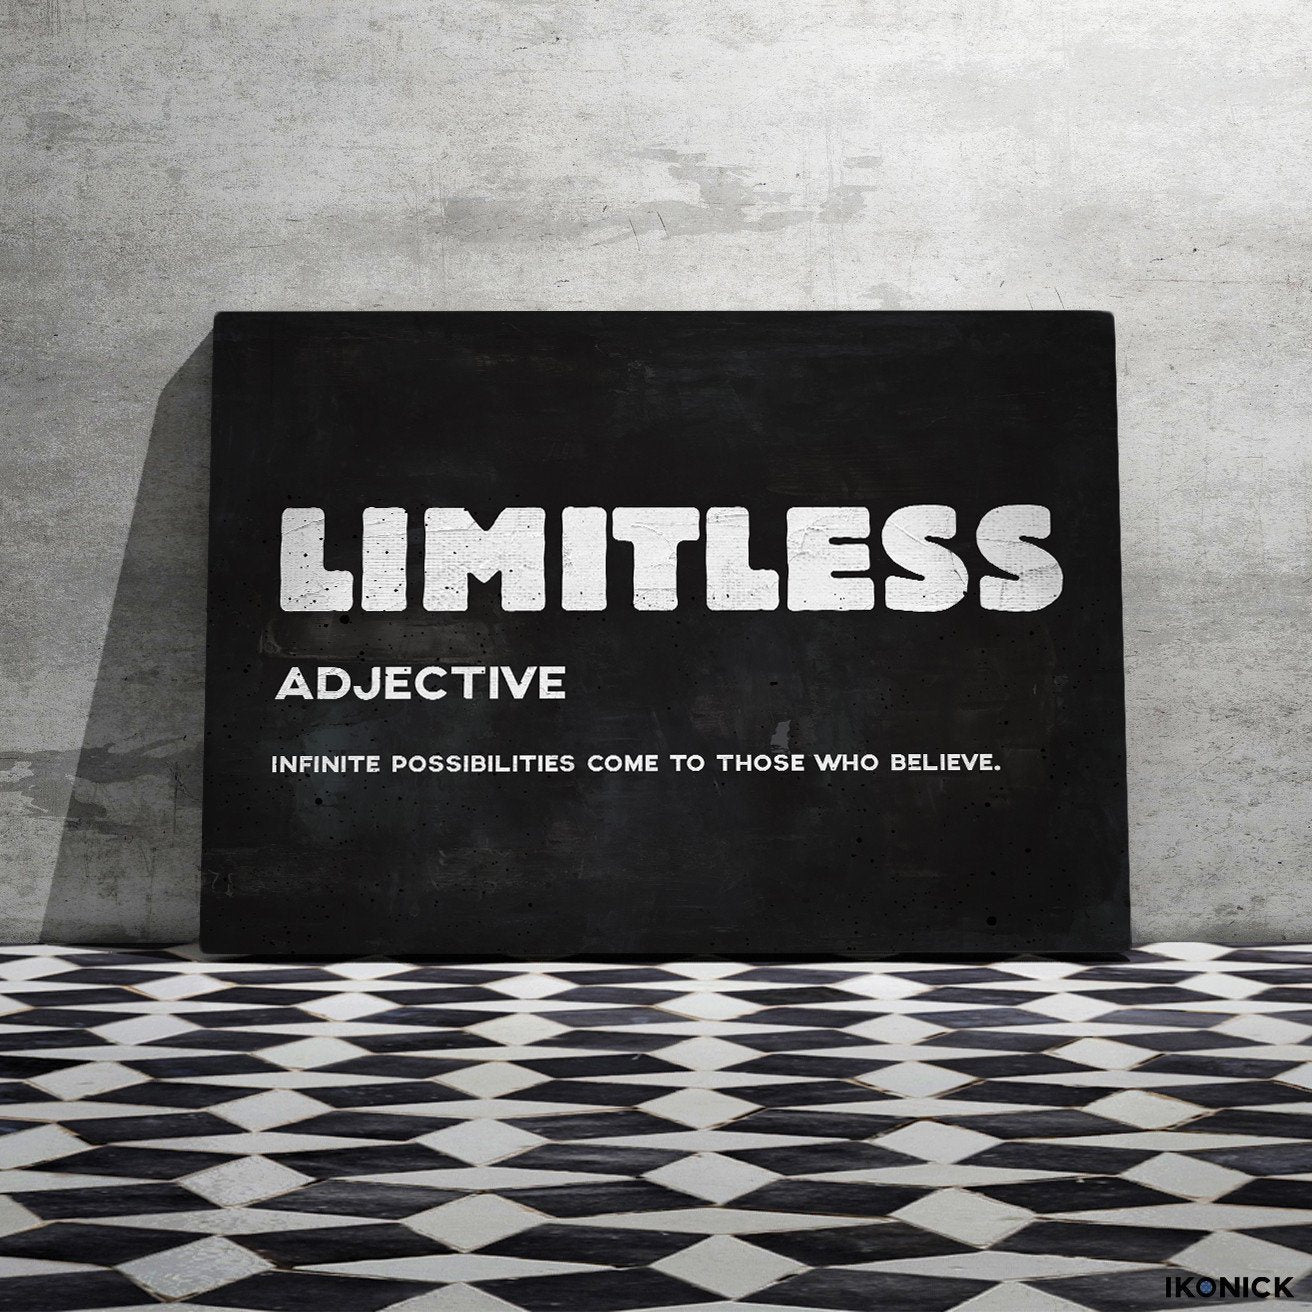 High-Quality "Limitless" Premium Canvas - USTAD HOME